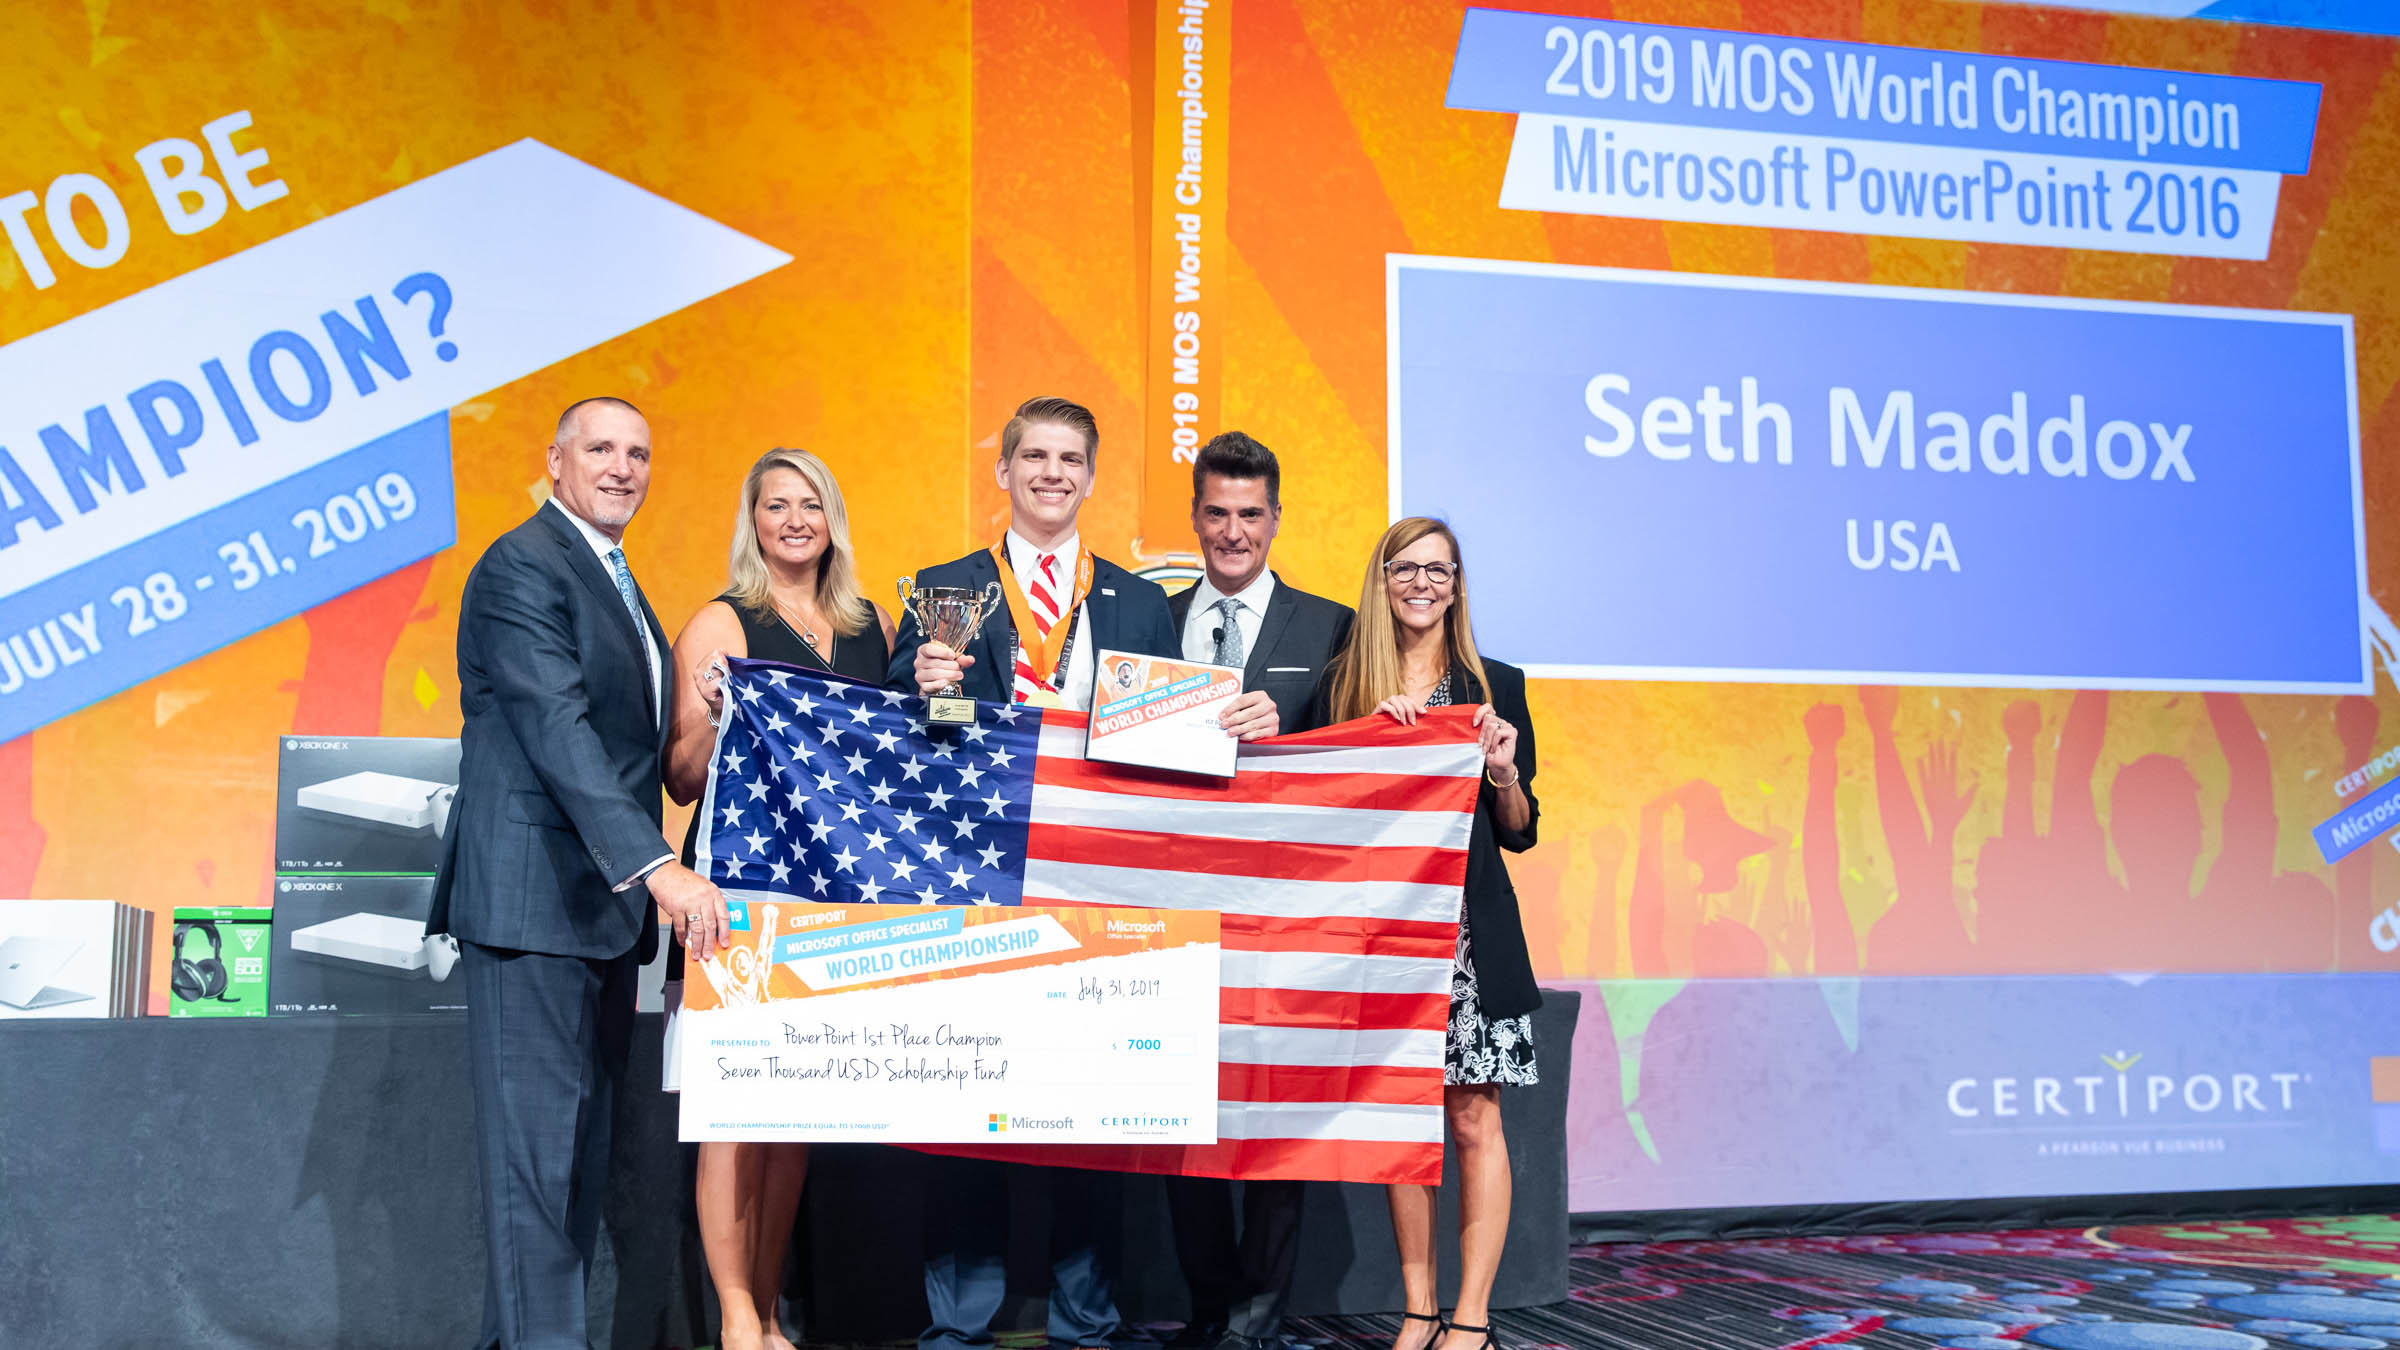 Incoming Auburn University freshman Seth Maddox was crowned the 2019 Microsoft Office Specialist PowerPoint World Champion on July 31 in New York. Pictured, from left, are Don Wagner and Nancy Jerdee with Pearson, Maddox, and Anthony Salcito and Jennifer Filarski with Microsoft.